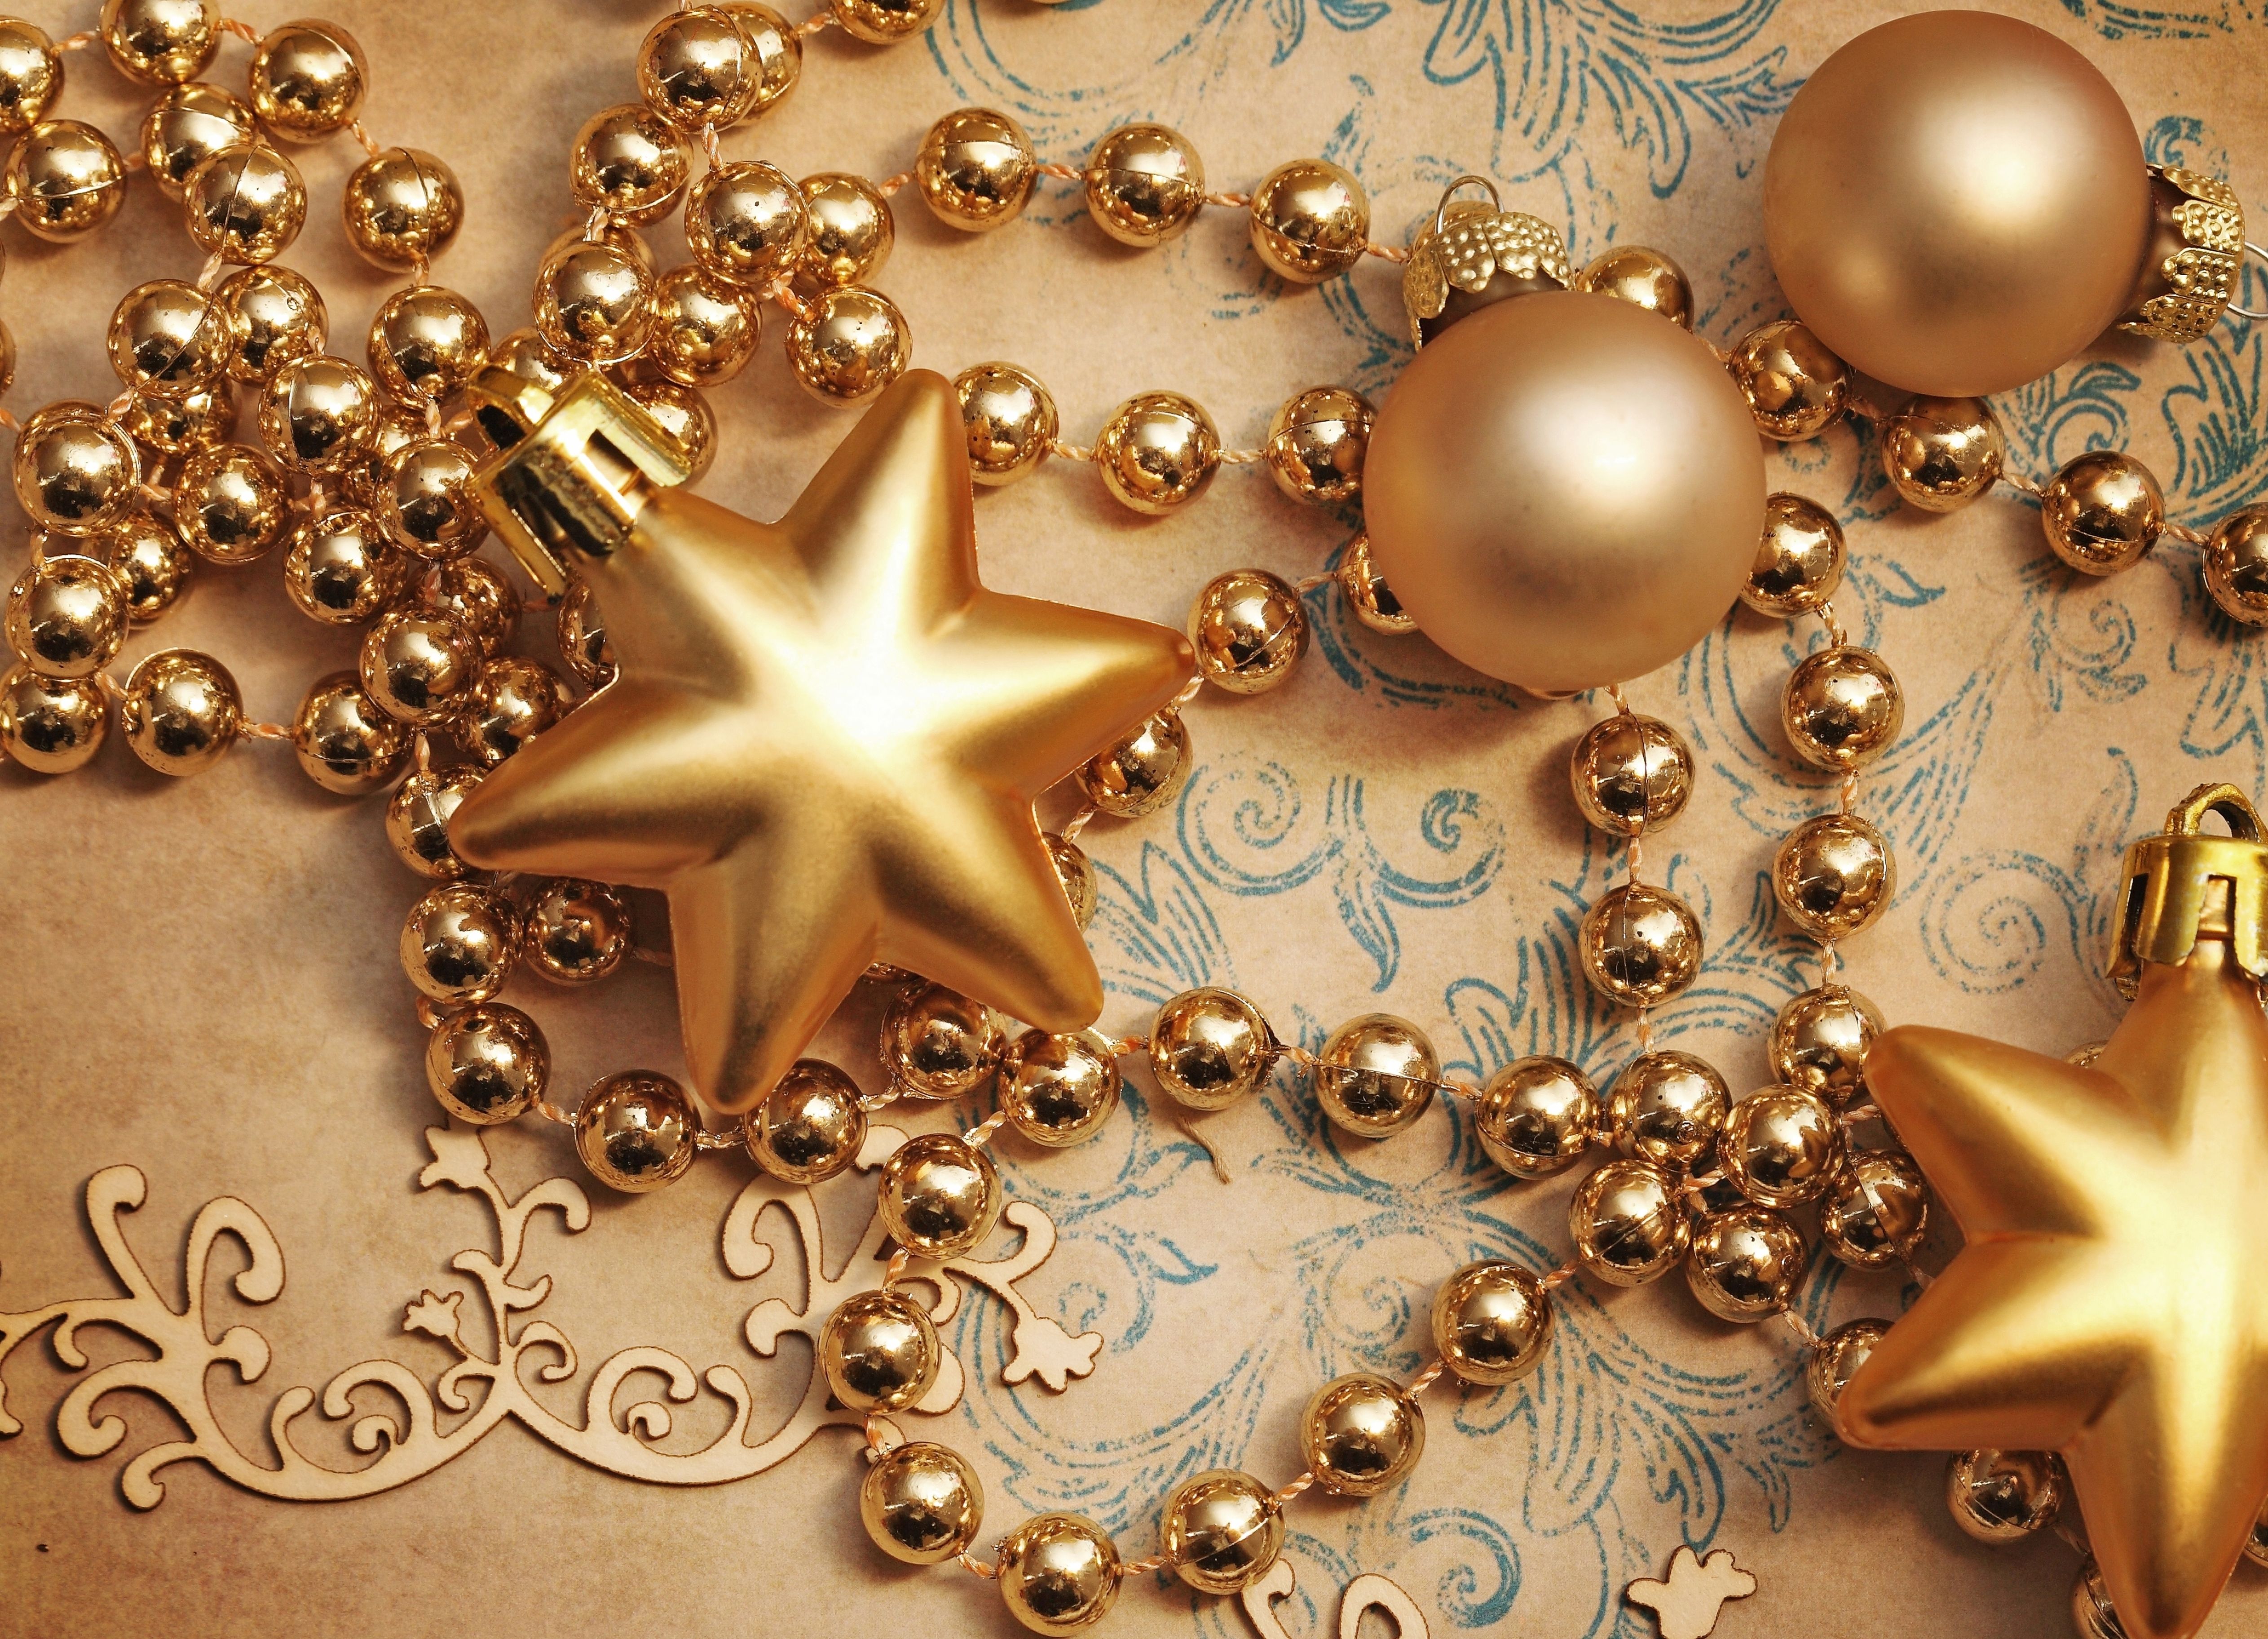 Gold stars for the Christmas tree wallpaper and image, picture, photo